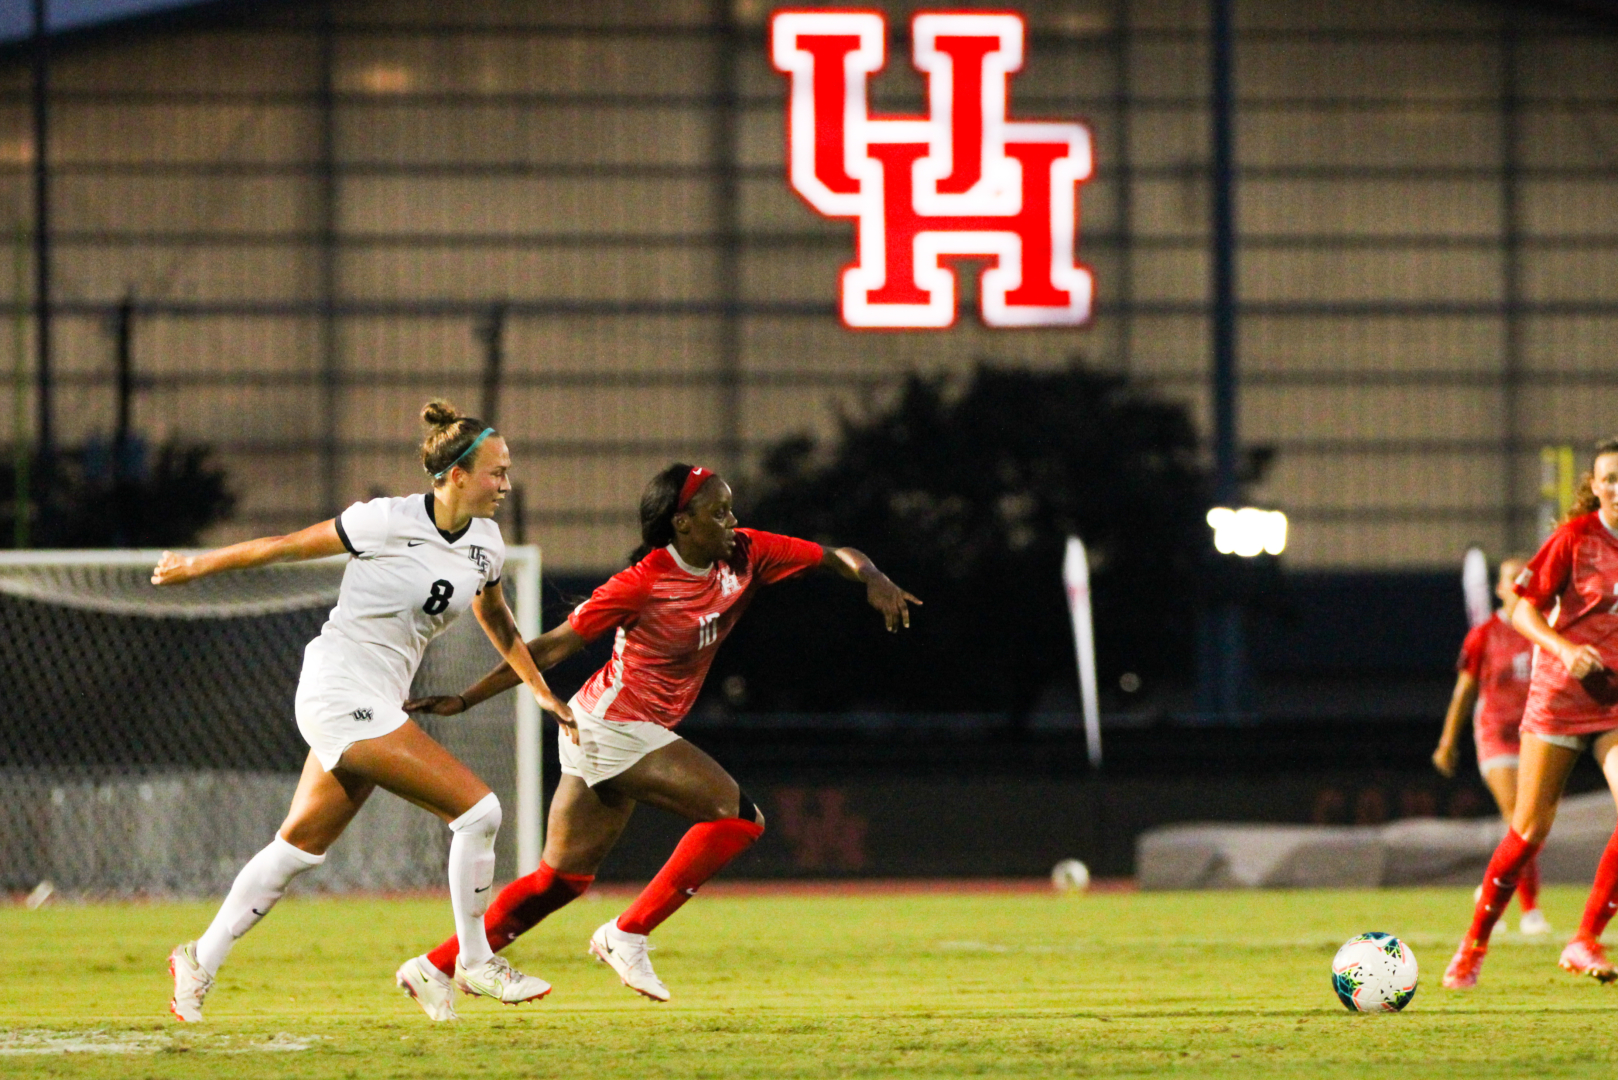 UH soccer fell to Temple 2-1 on Sunday afternoon in Philadelphia. | Sean Thomas/The Cougar